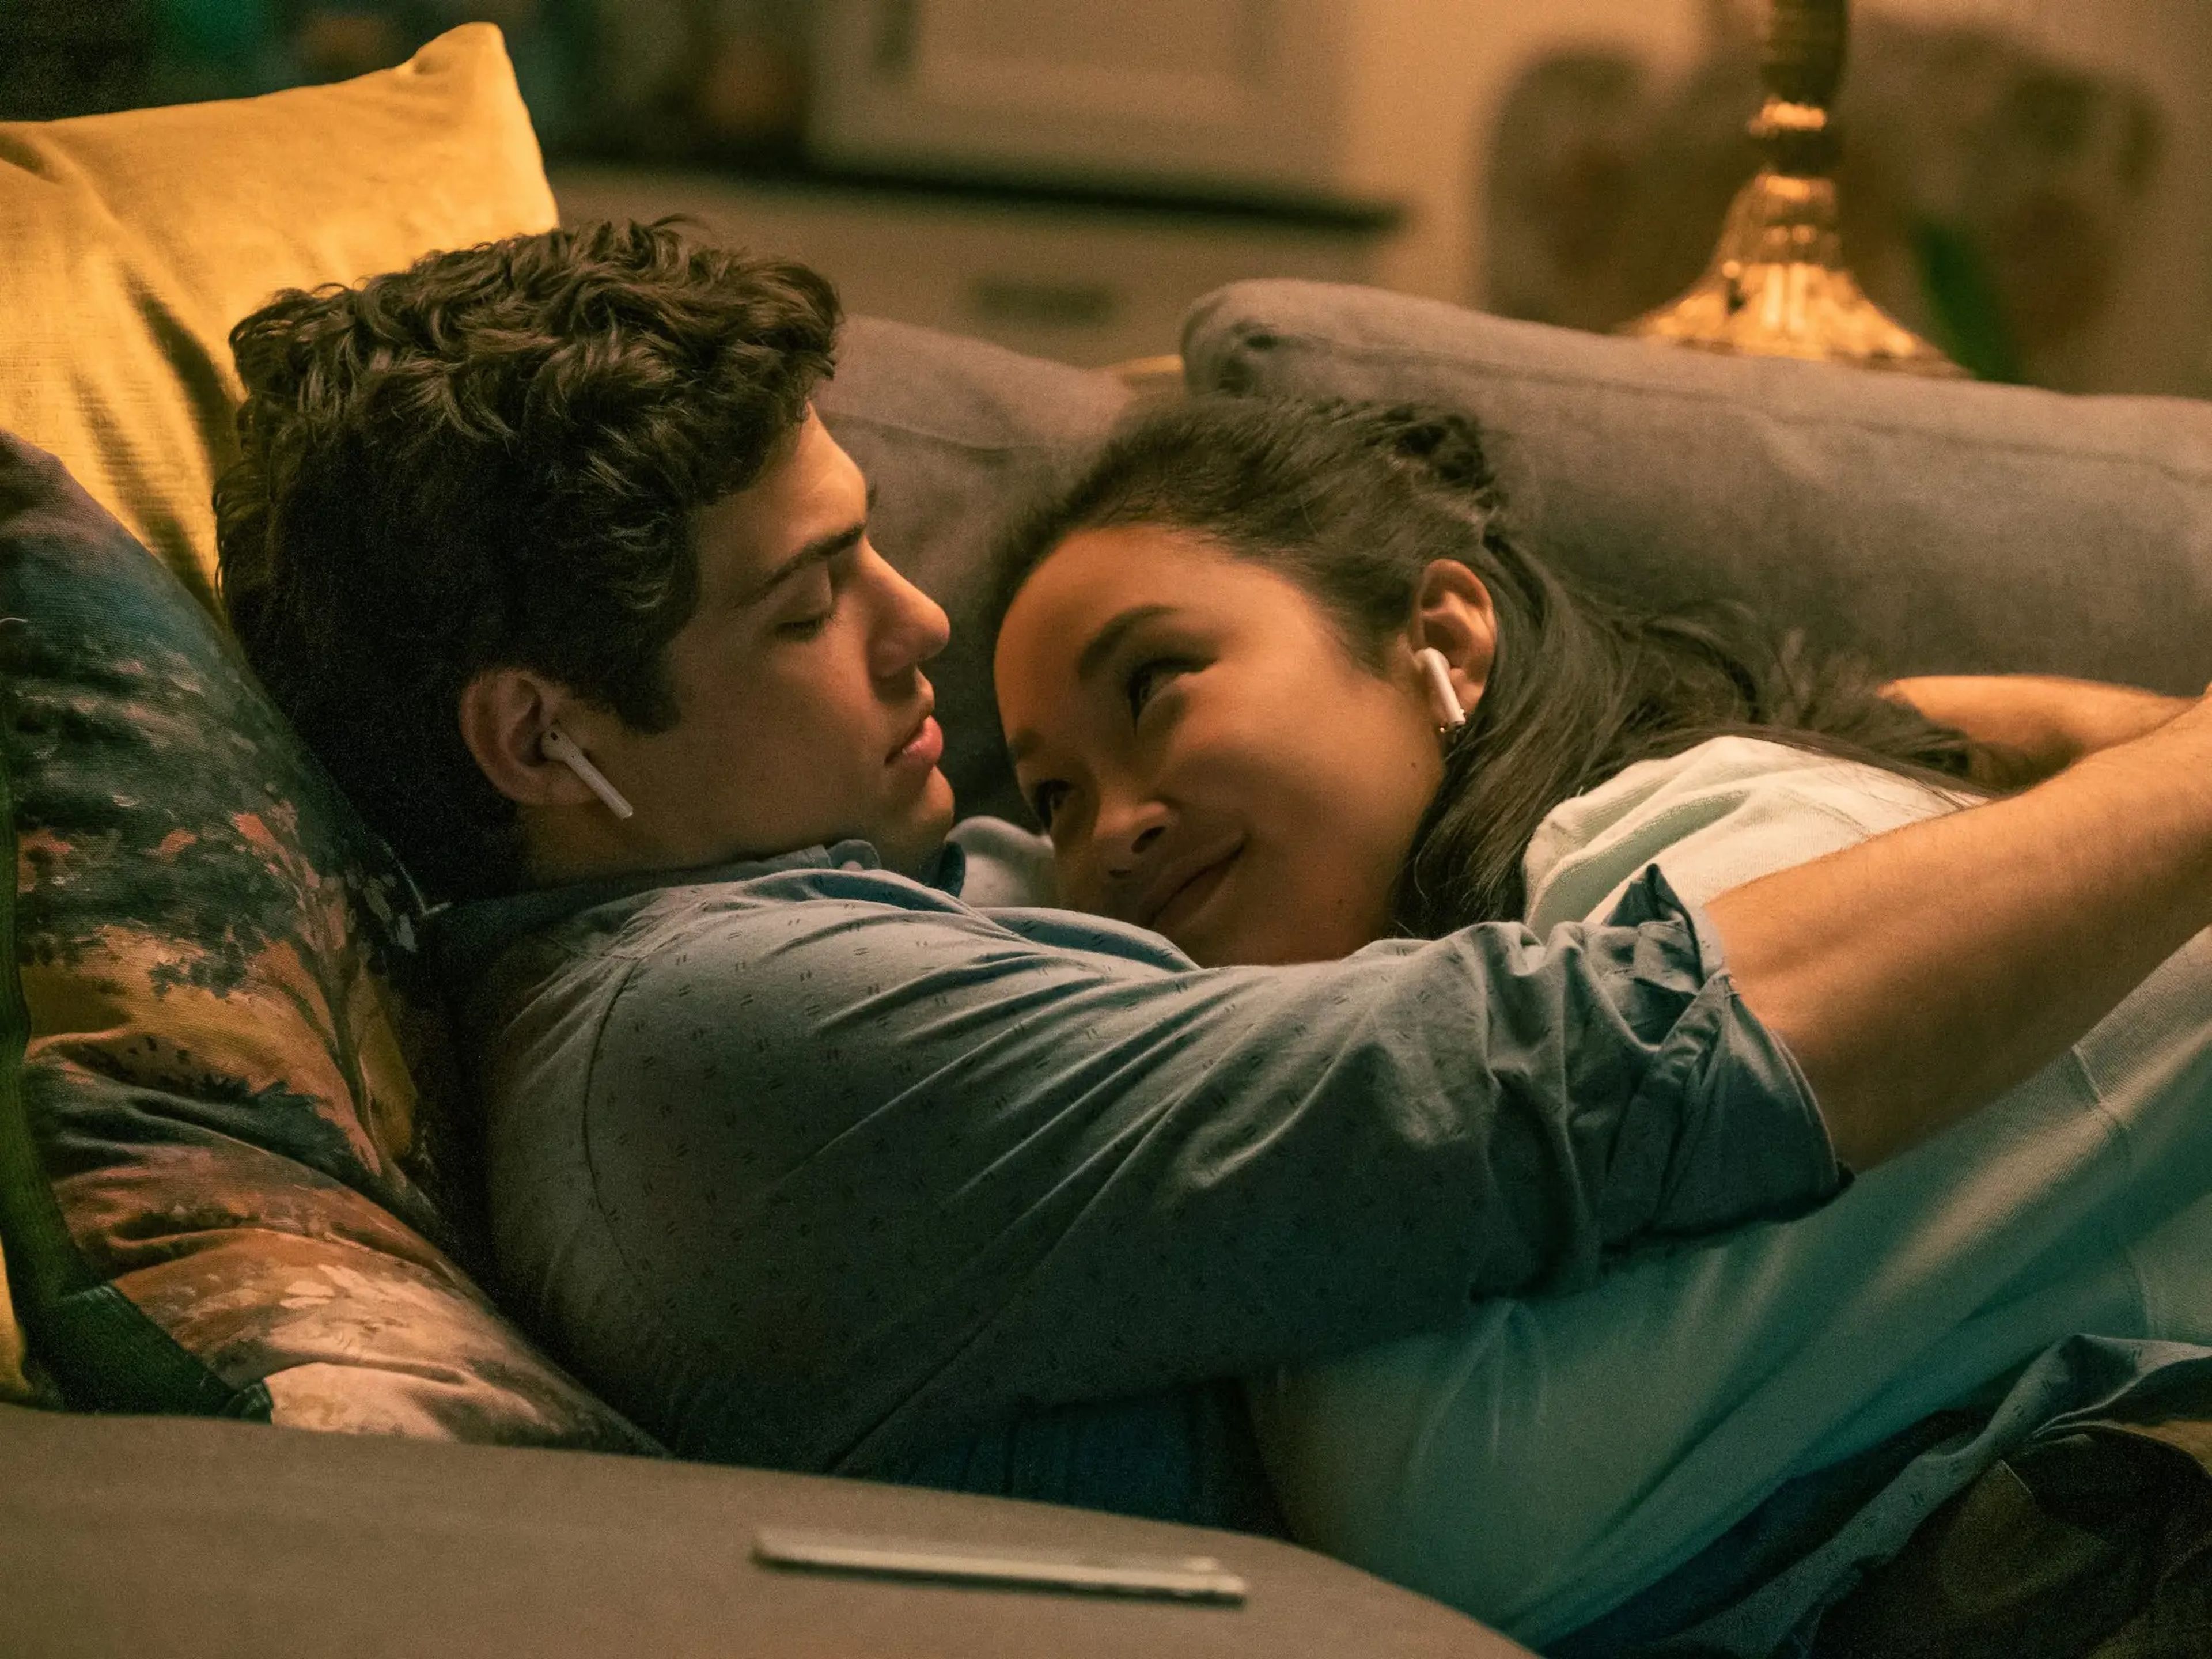 Noah Centineo y Lana Condor en 'To All the Boys: Always and Forever'.